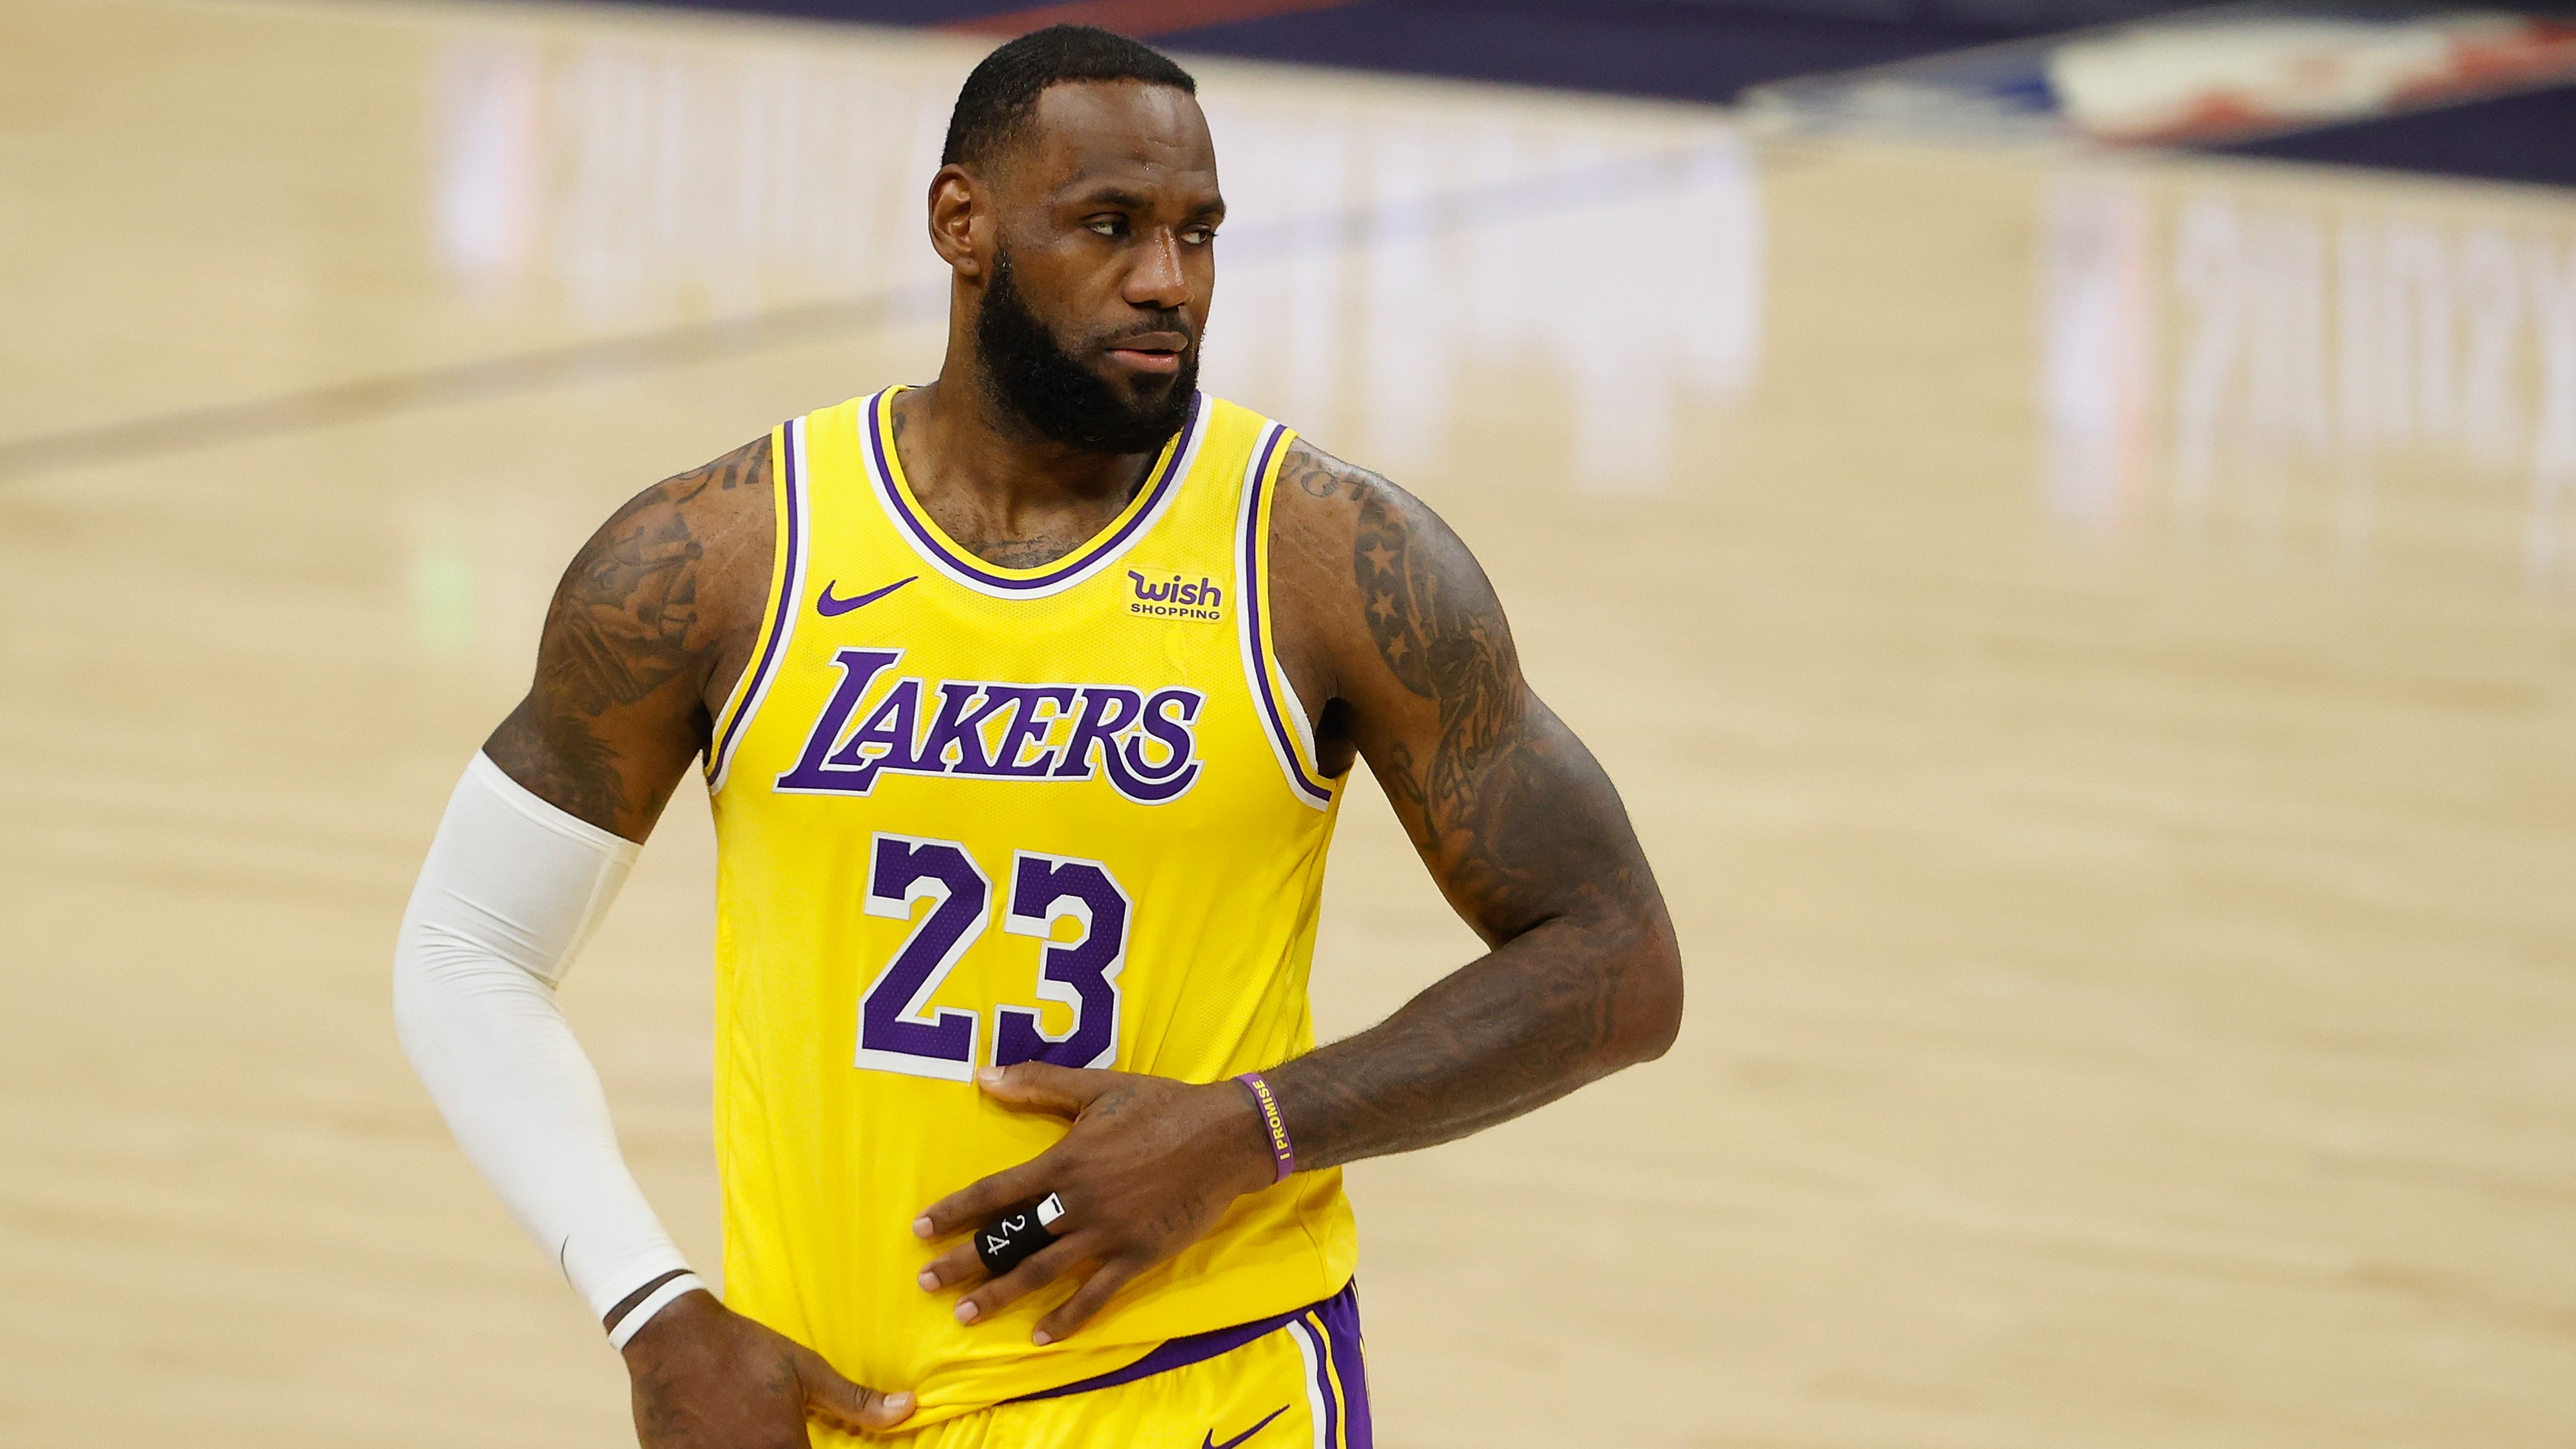 lakers game today live stream